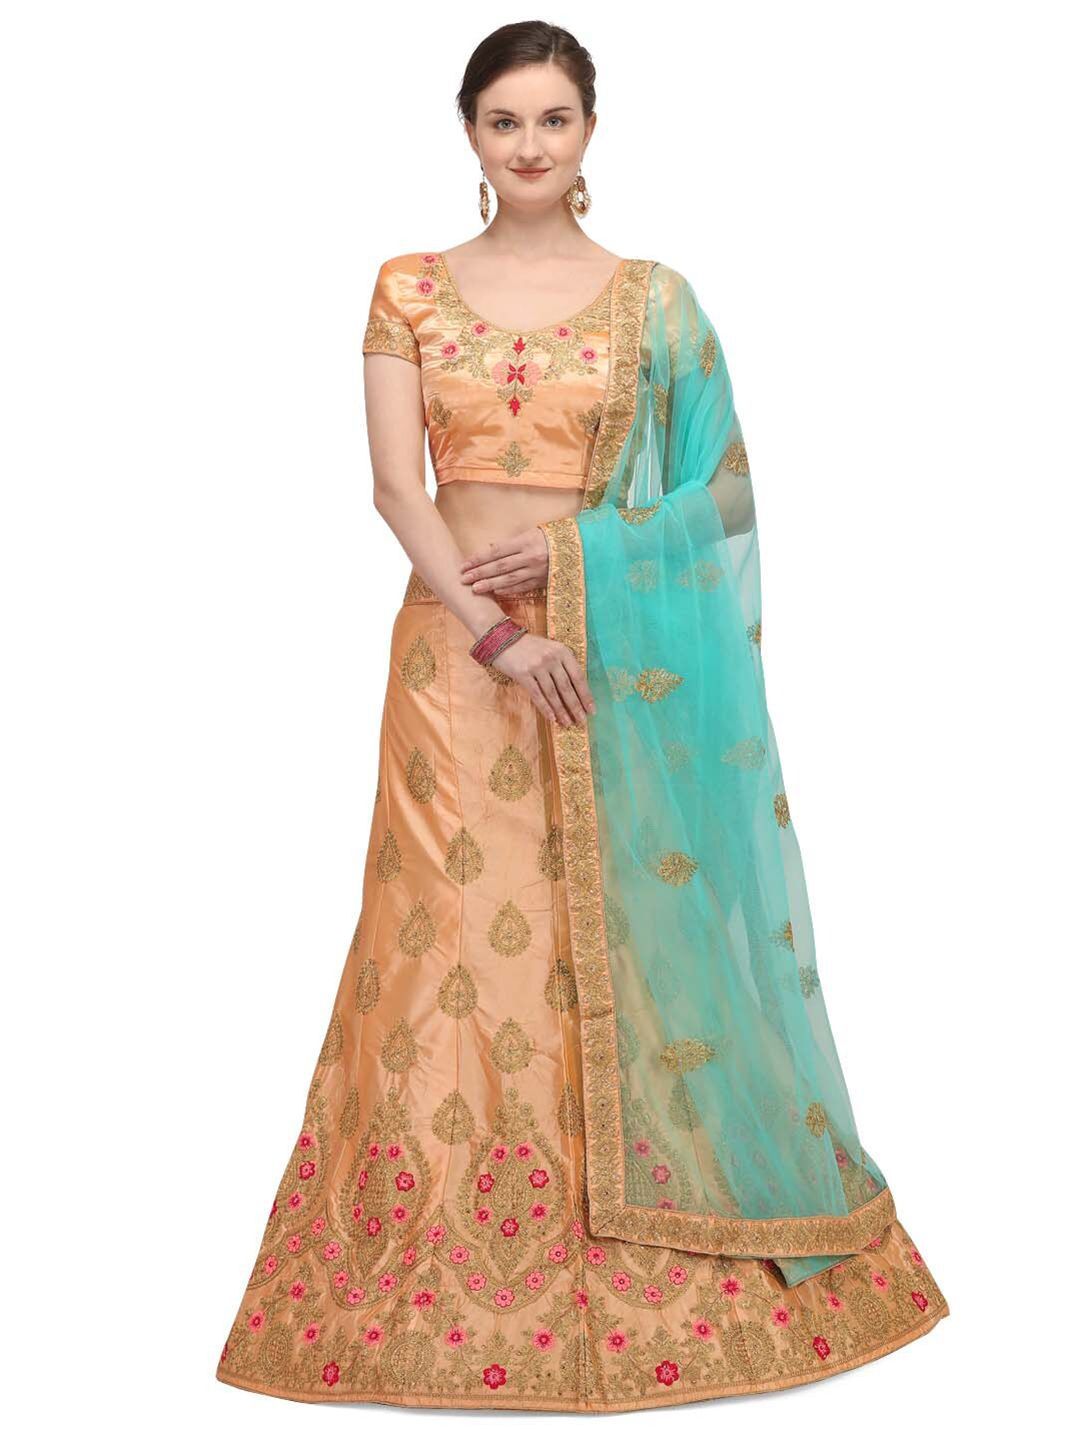 Netram Peach-Coloured & Turquoise Blue Embroidered Semi-Stitched Lehenga & Unstitched Blouse With Dupatta Price in India